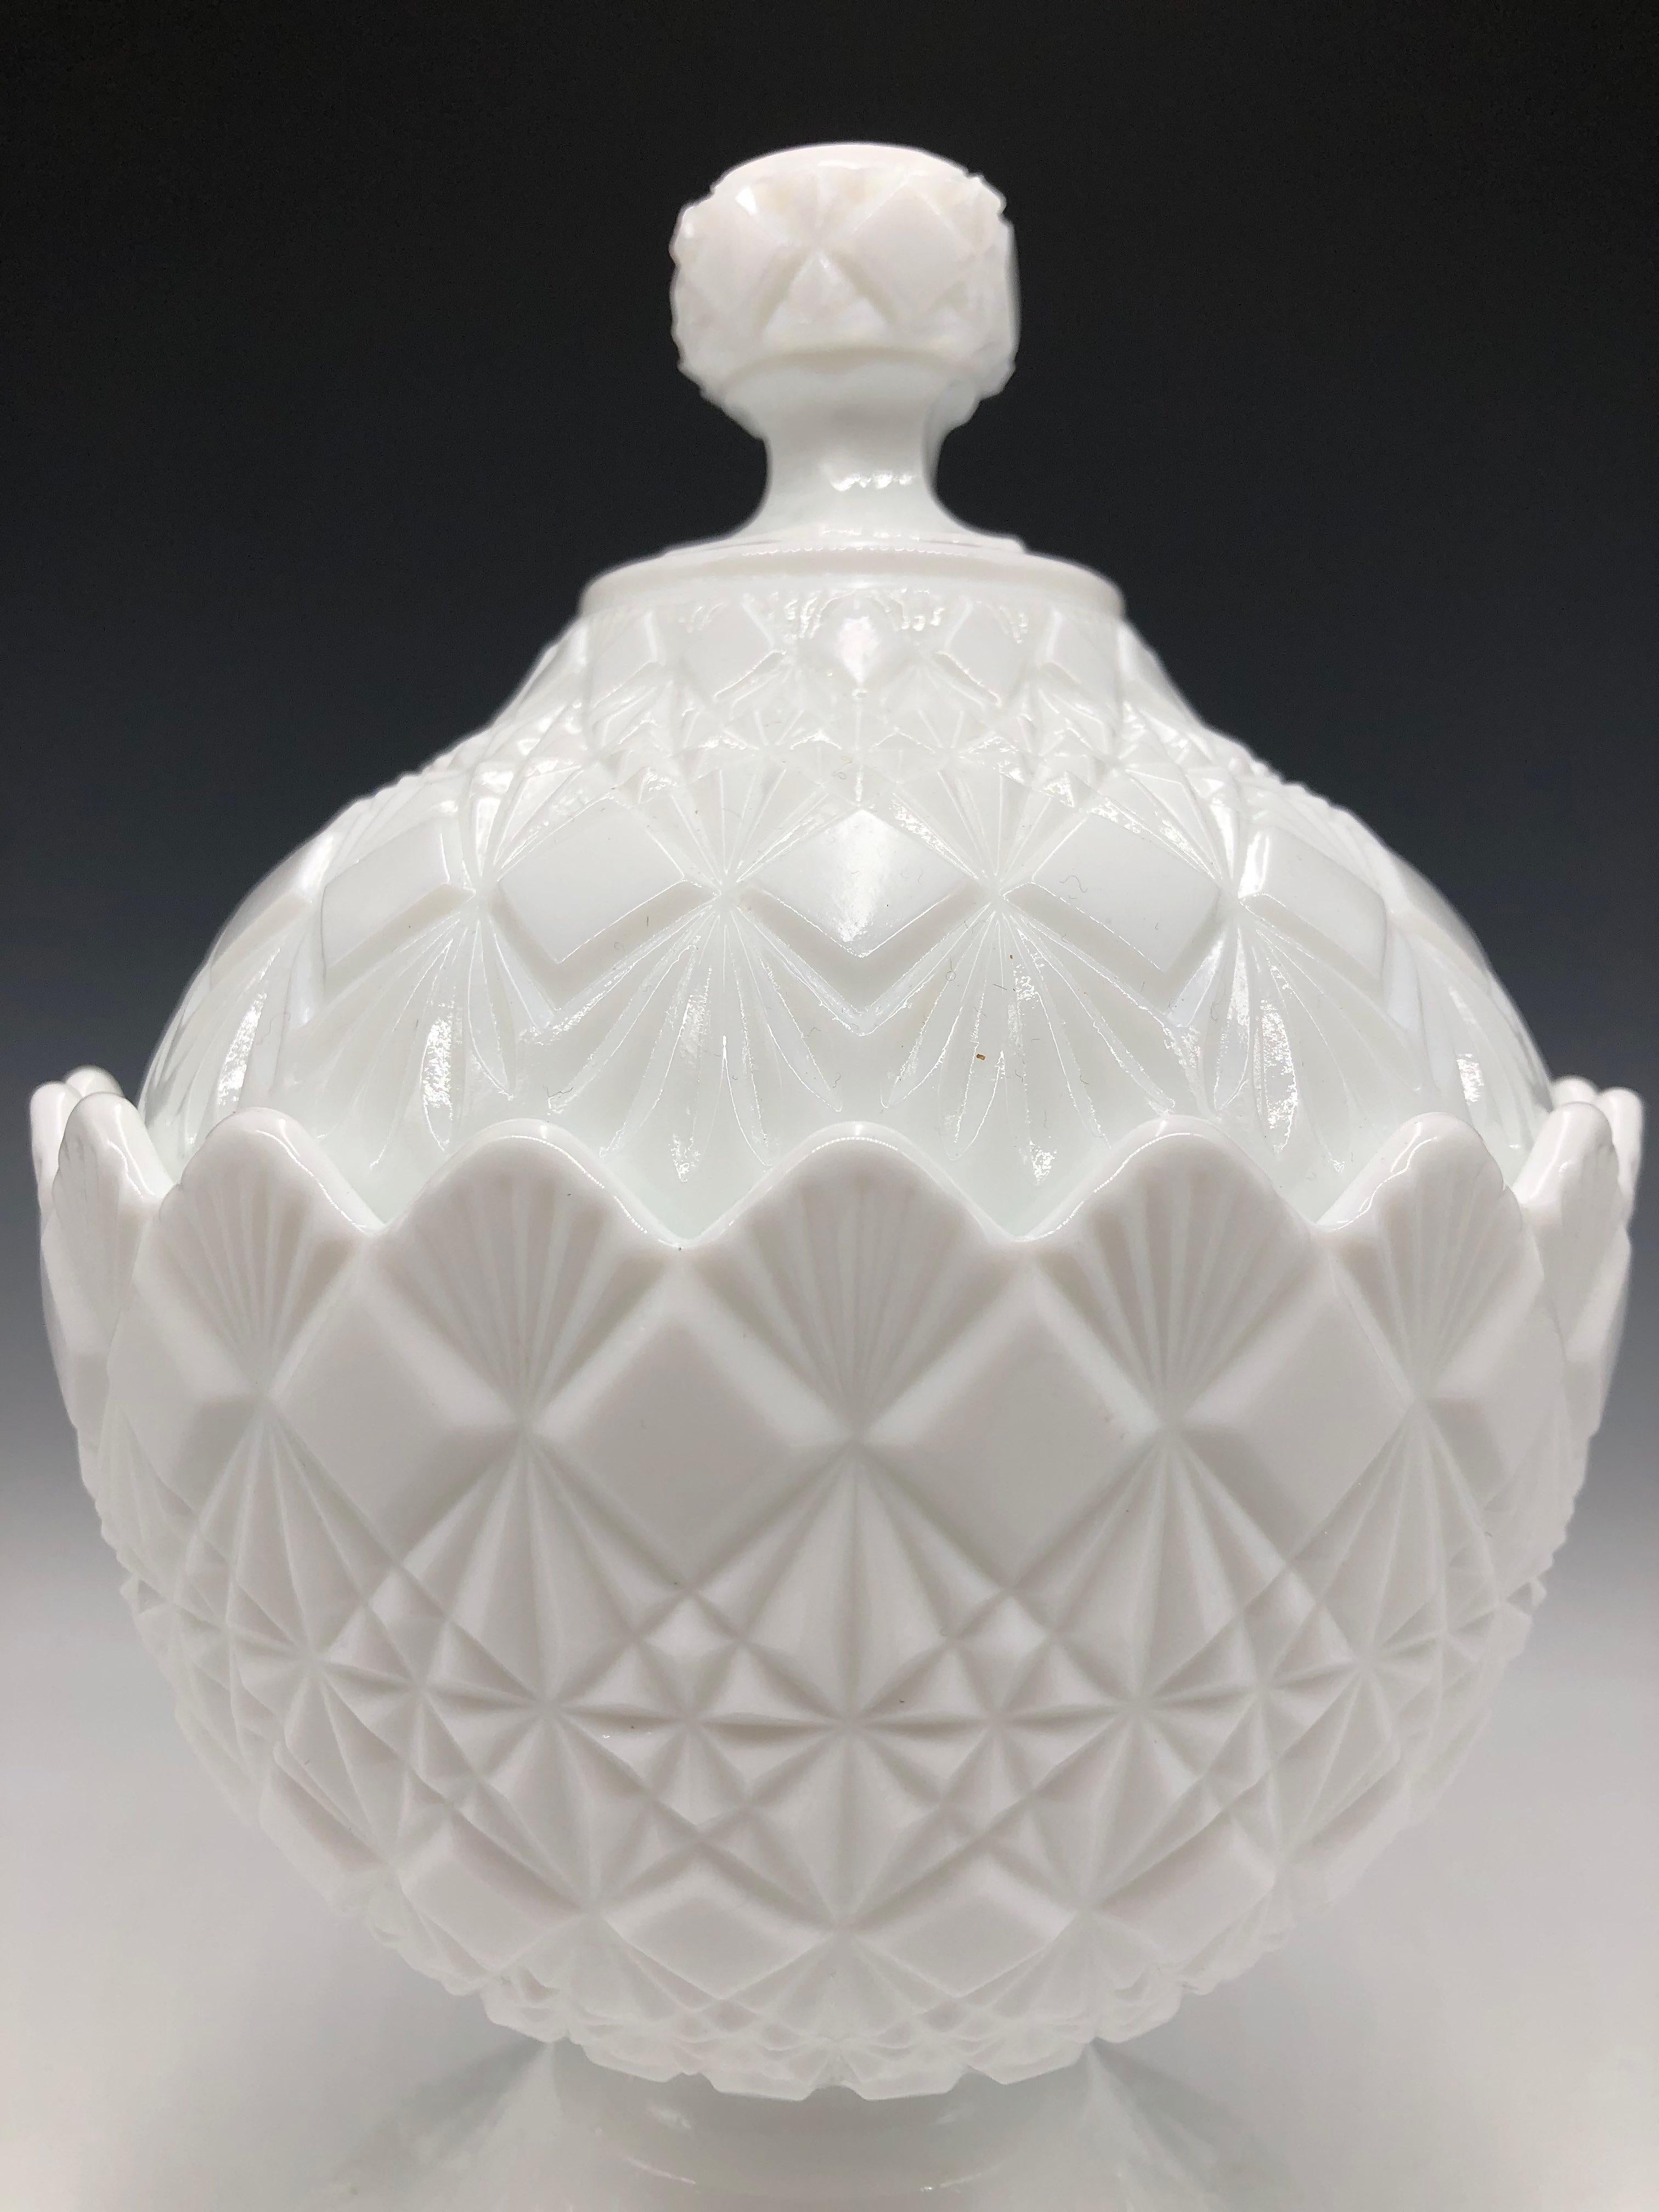 American 1960s White Fenton Olde Virginia Glass Pedestal Candy Dish with Lid For Sale